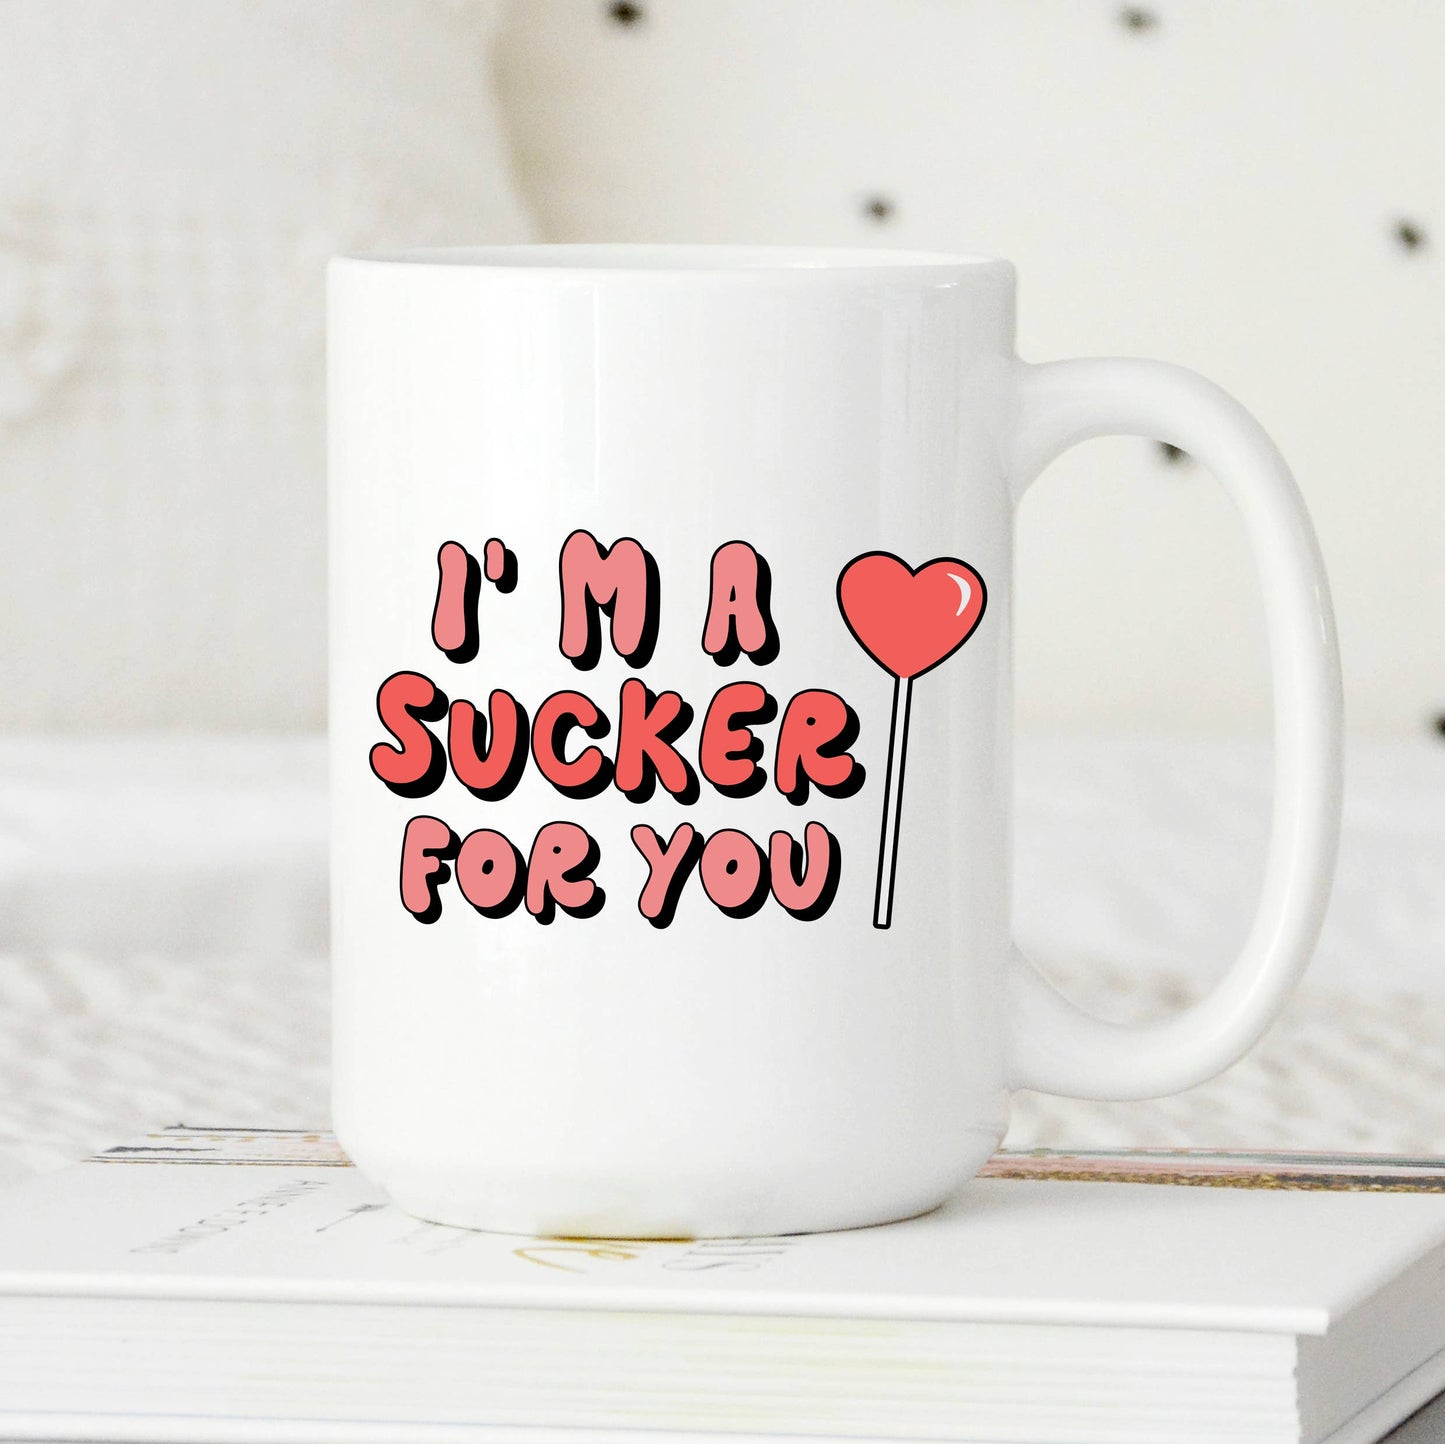 Sweet Mint Handmade Goods - 15oz mug, I'm a sucker for you cup, Valentine's Day, Love